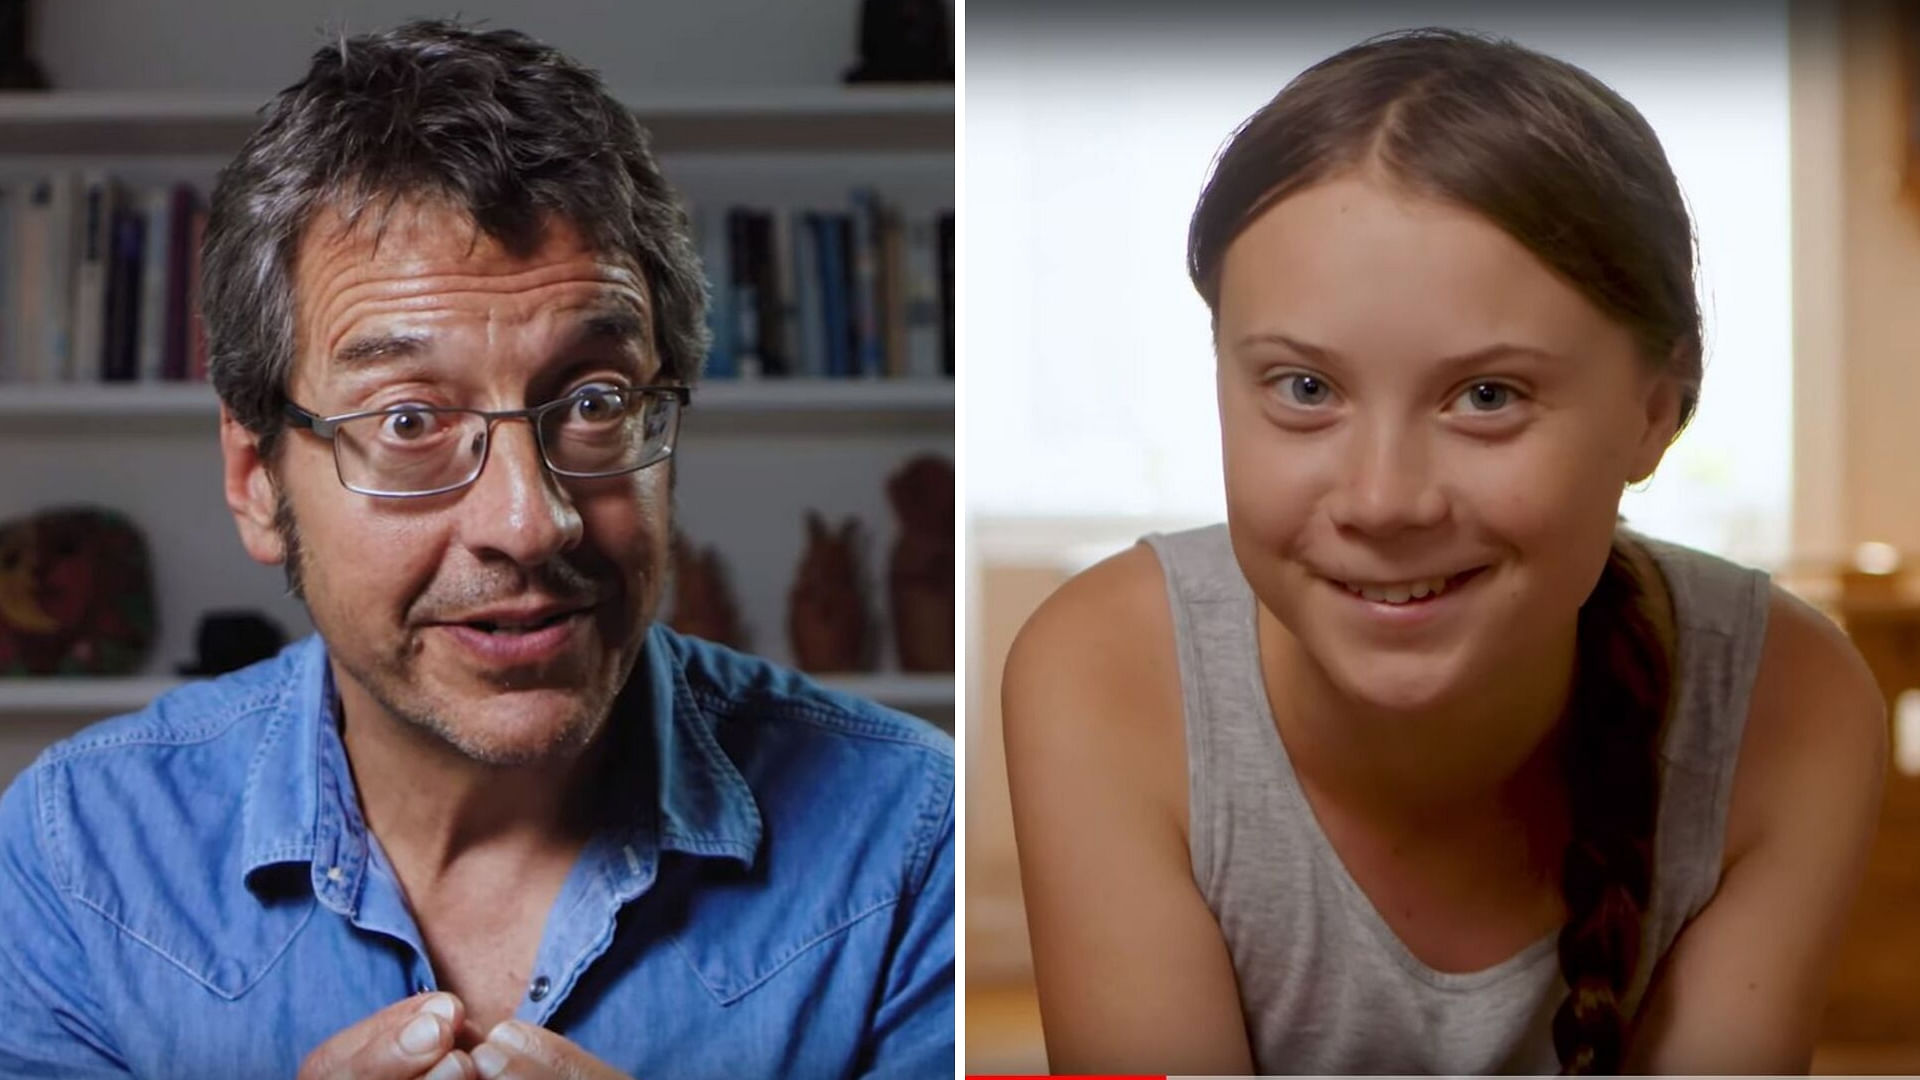 A still from the video - Greta Thunberg (right) and George Monbiot (left) talk about the need for saving nature.